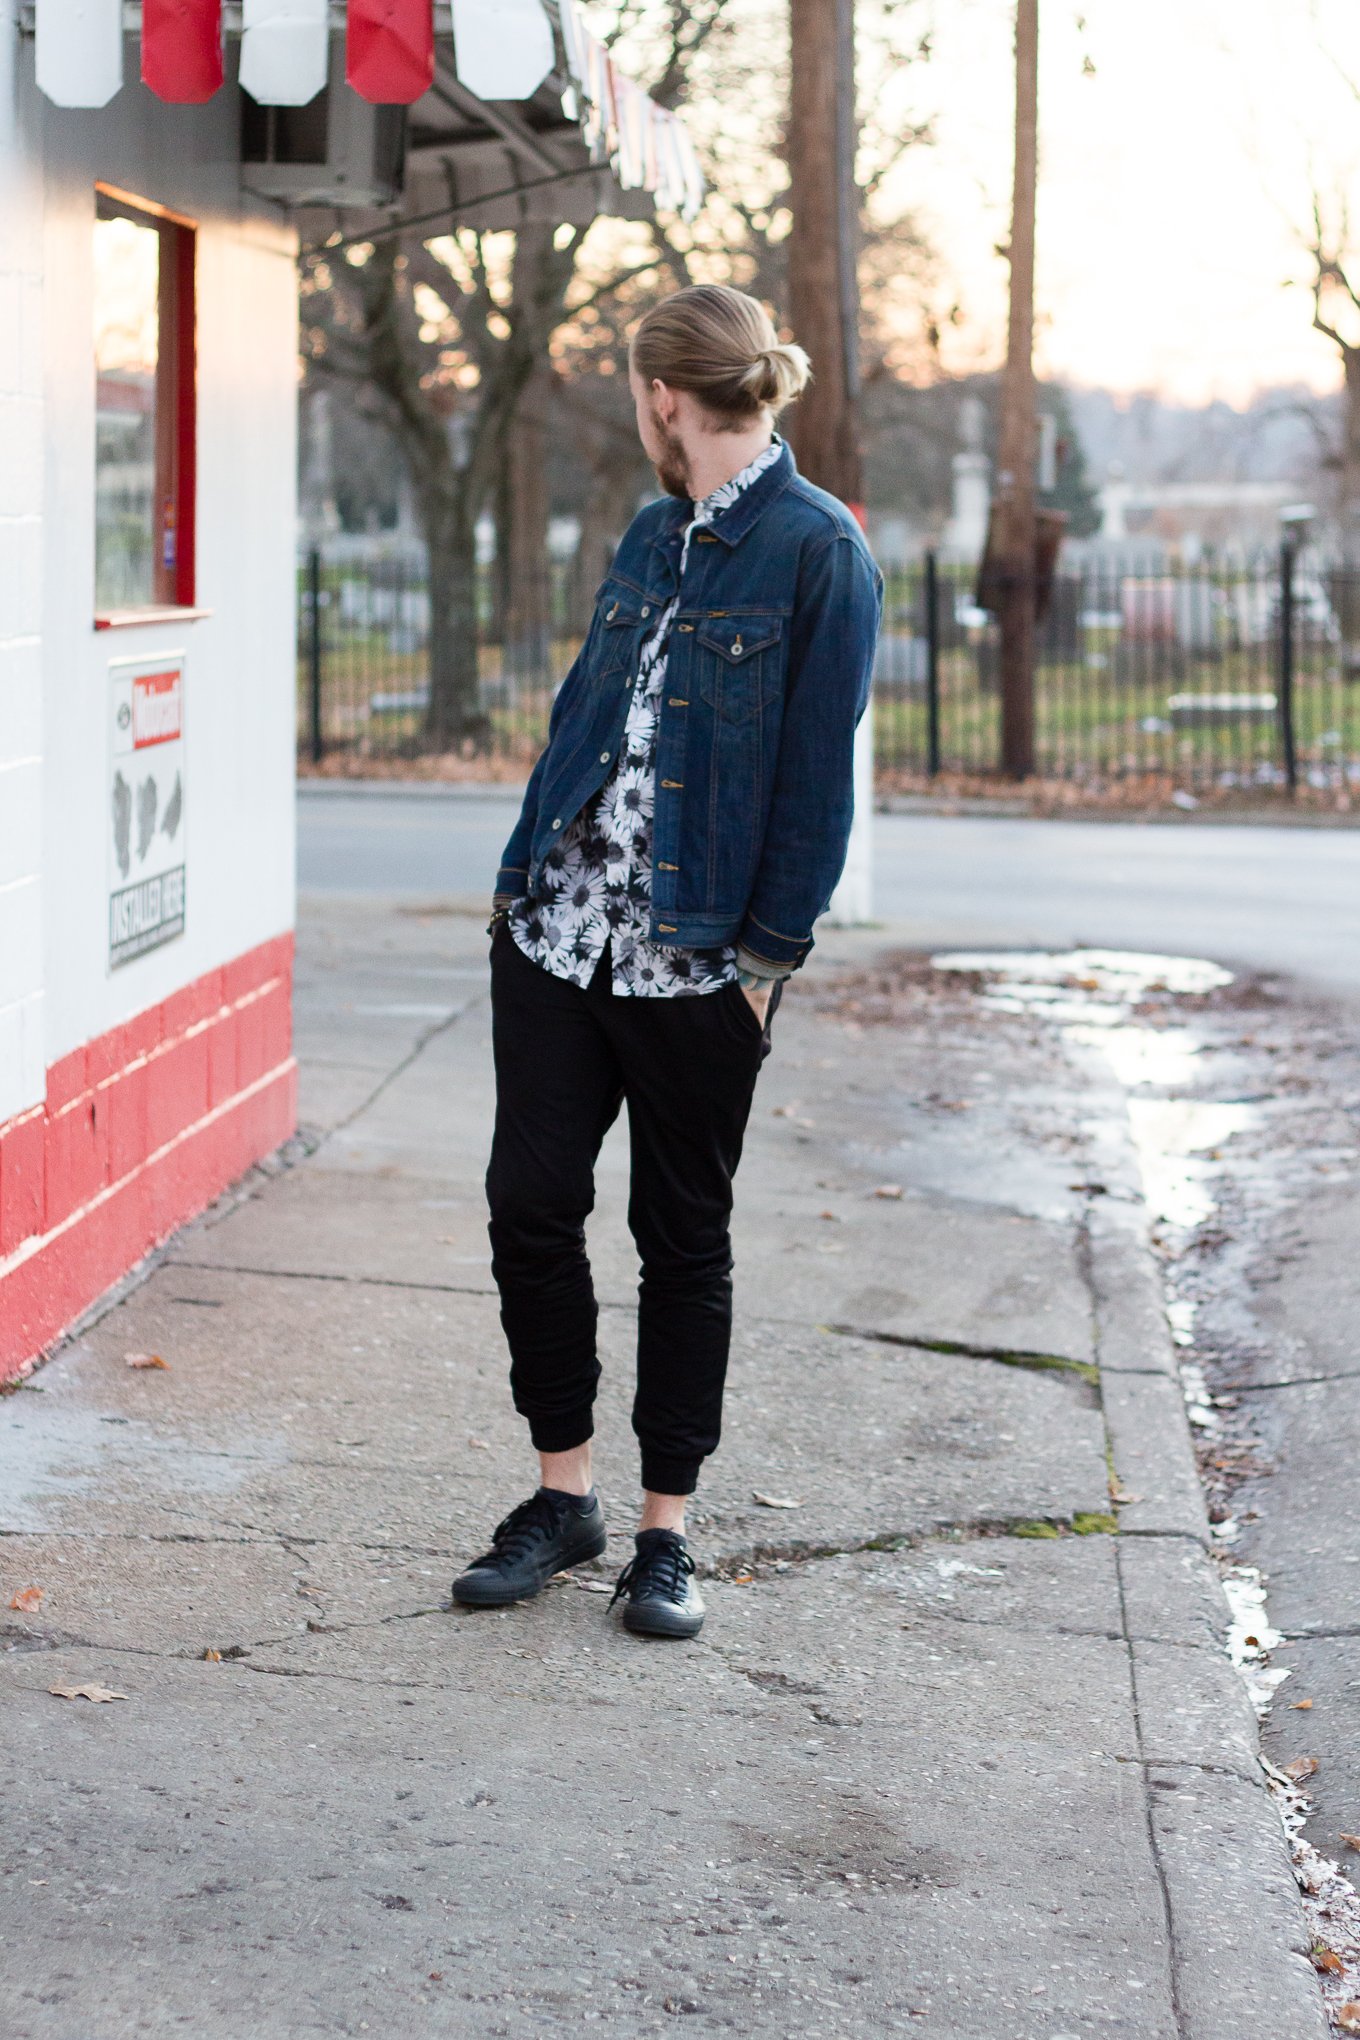 The Kentucky Gent, a Louisville, Kentucky based men's fashion and lifestyle blogger, shares his Woman Crush Wednesday while wearing Topman, Big Star, and Converse.